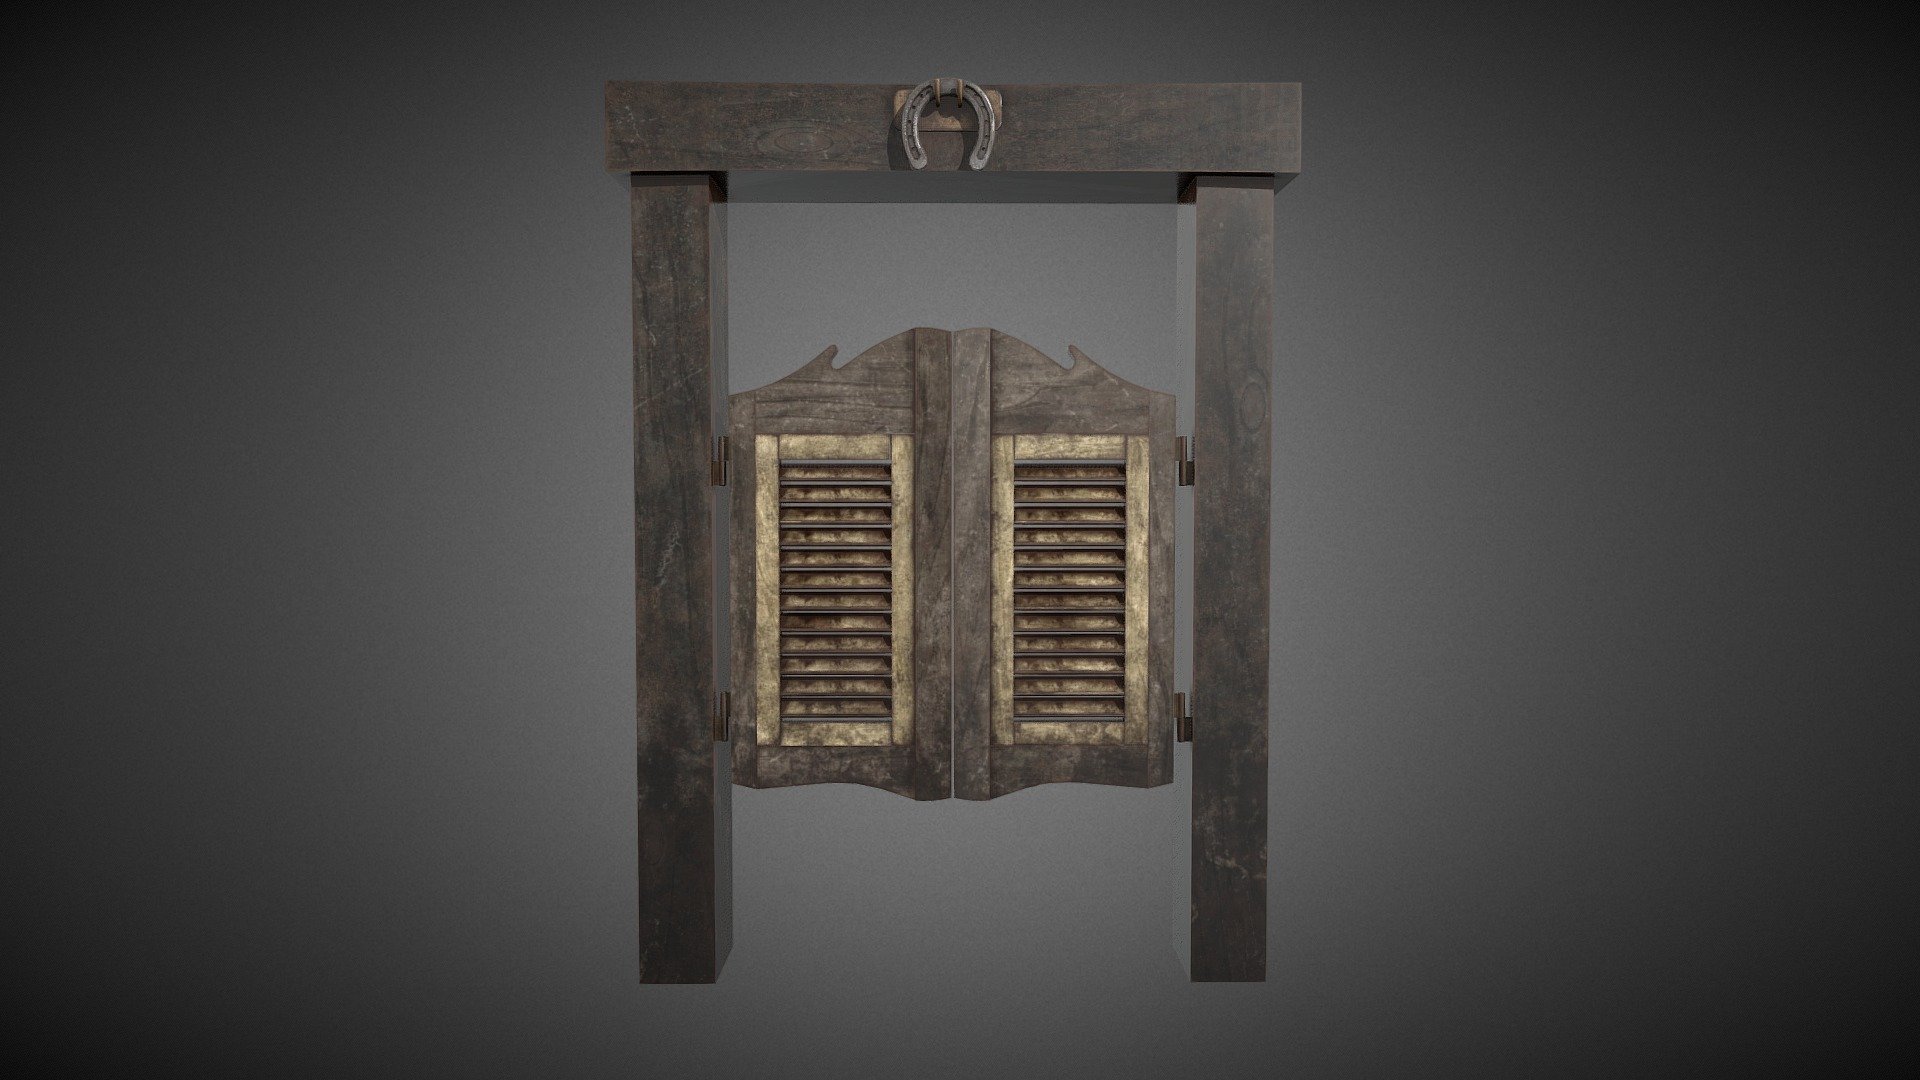 Saloon Door contains low poly 3D model with High Quality textures with to fill up your game environment. The assets are VR-Ready and game ready.

No Animation were included in this model

Total Polygons - 4170

For Unity3d (Built-in, URP, HDRP) Ready Assets visit our Unity Asset Store Page

Enjoy and please rate the asset!

Contact us on for AR/VR related queries and development support

Gmail - designer@devdensolutions.com

Website

Twitter

Instagram

Facebook

Linkedin

Youtube - Saloon Door - Buy Royalty Free 3D model by Devden 3d model